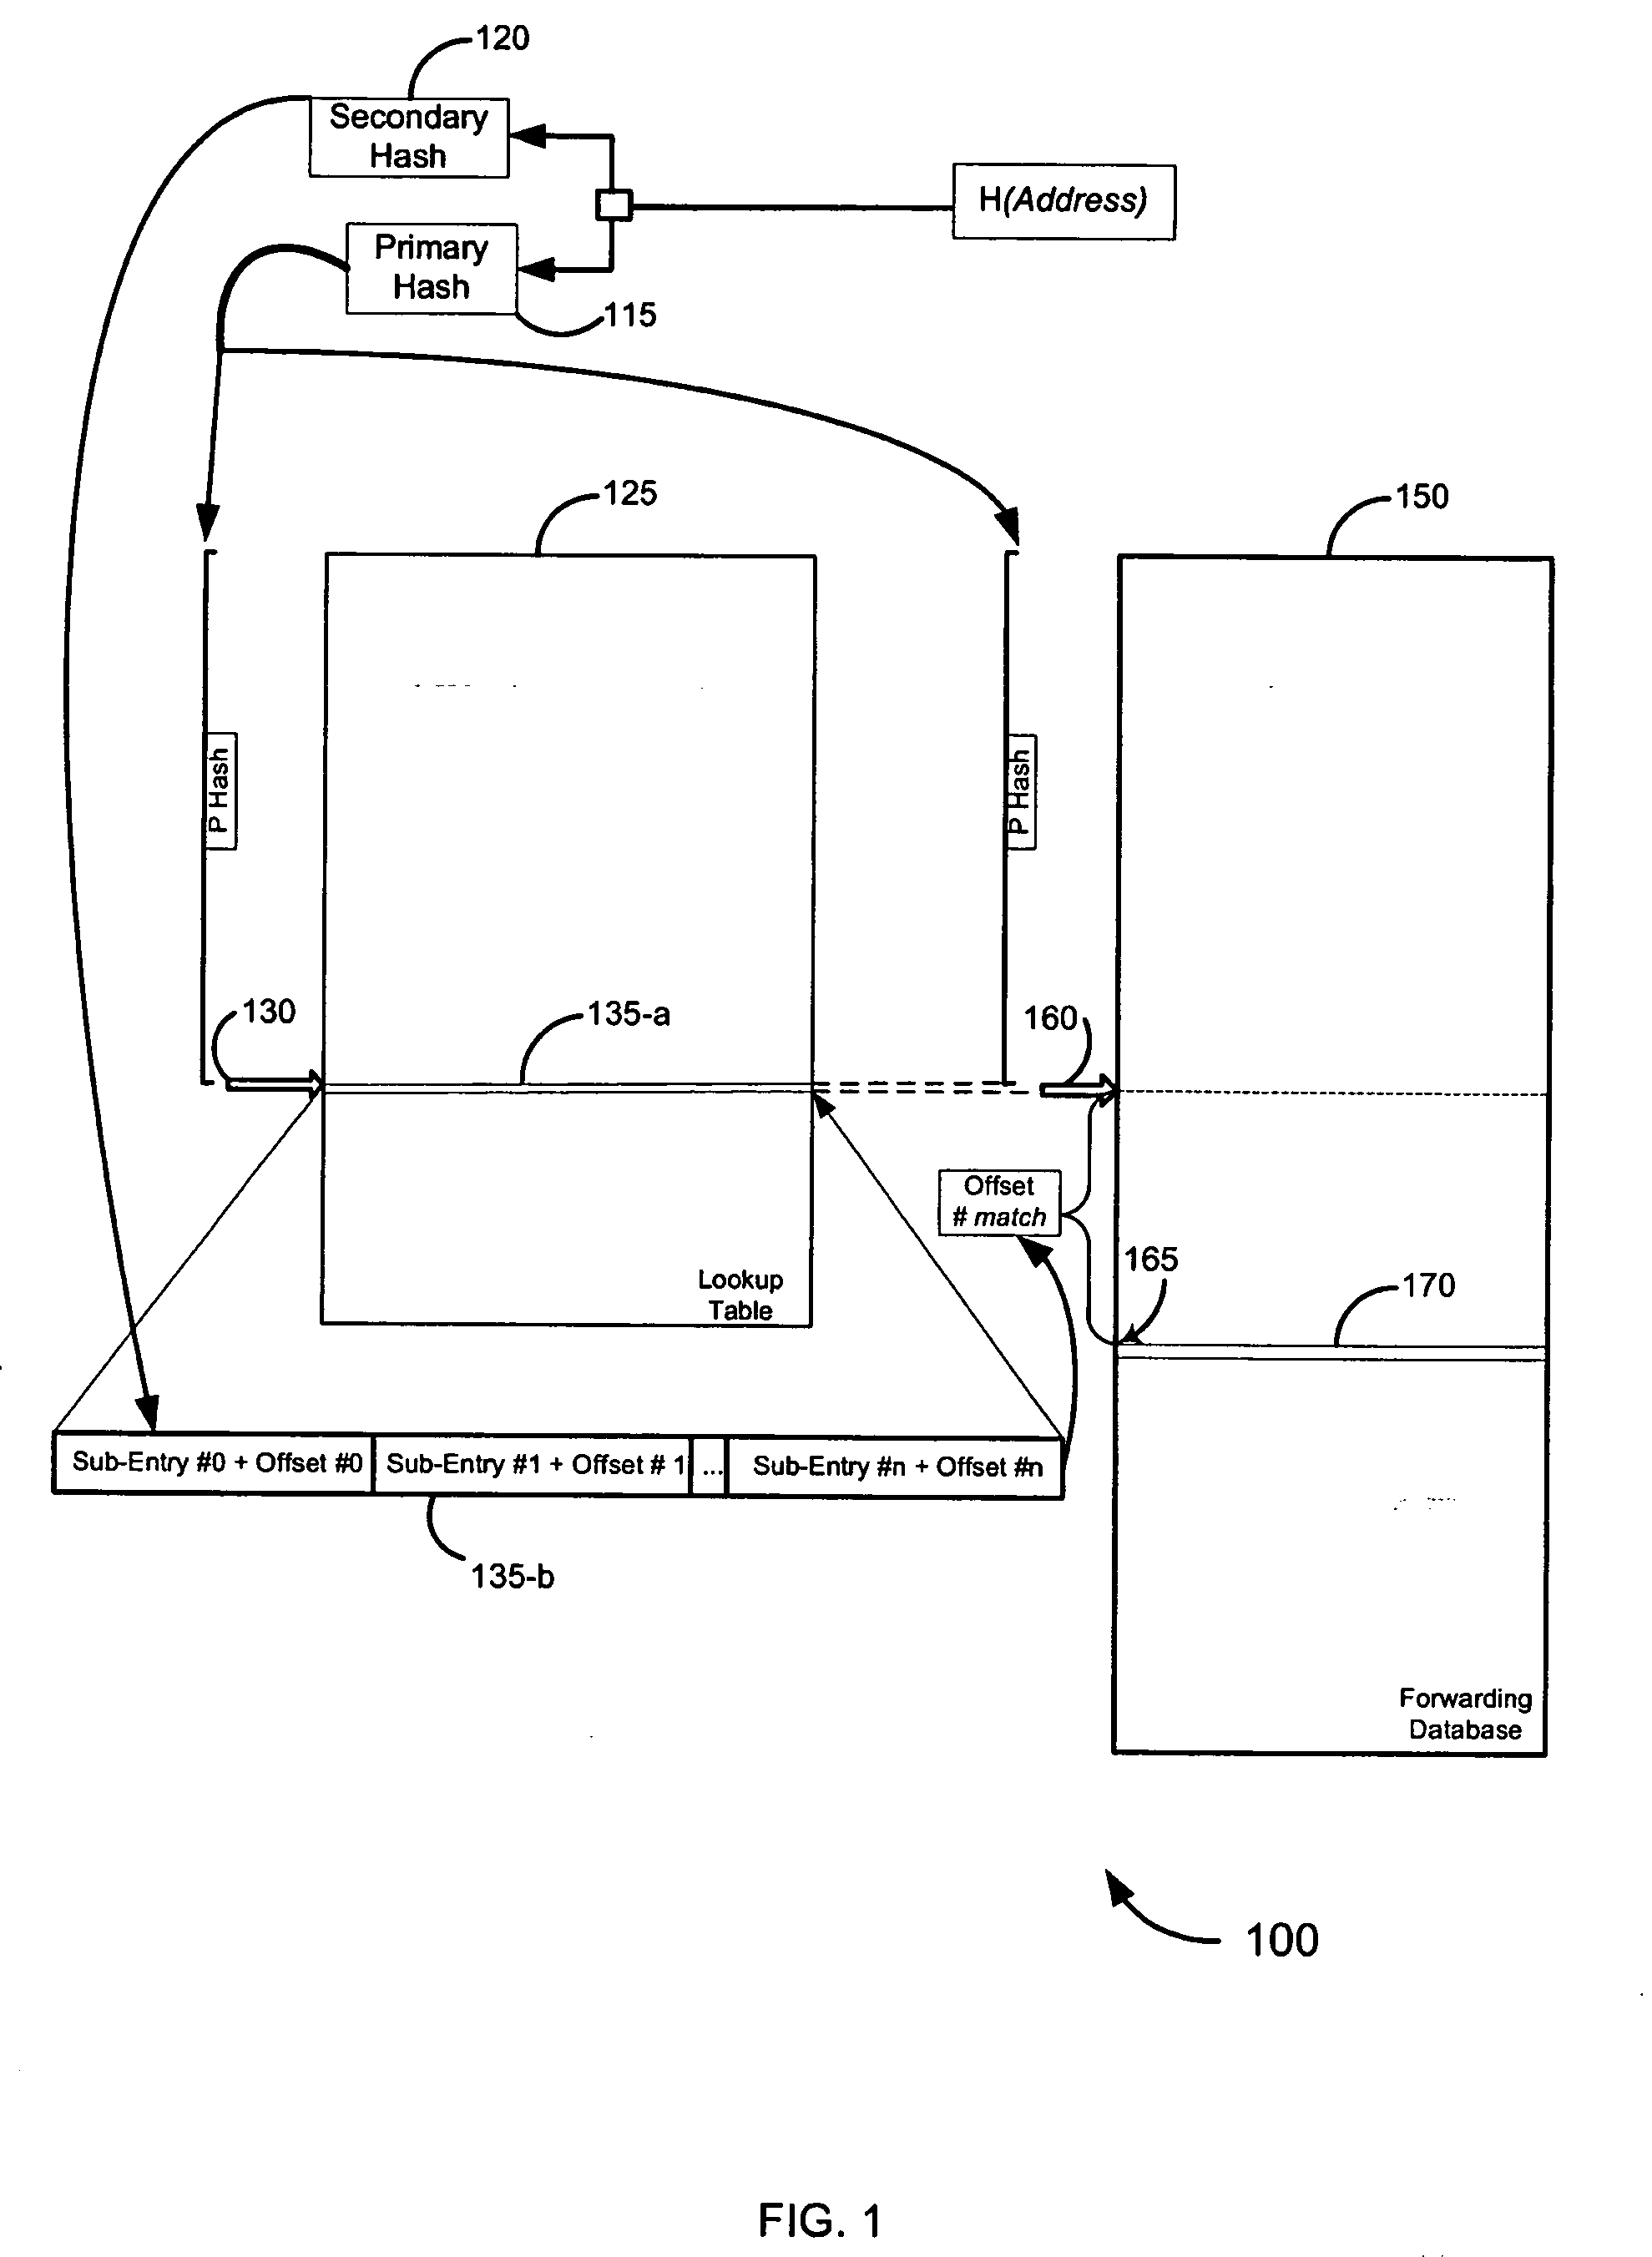 Double-hash lookup mechanism for searching addresses in a network device